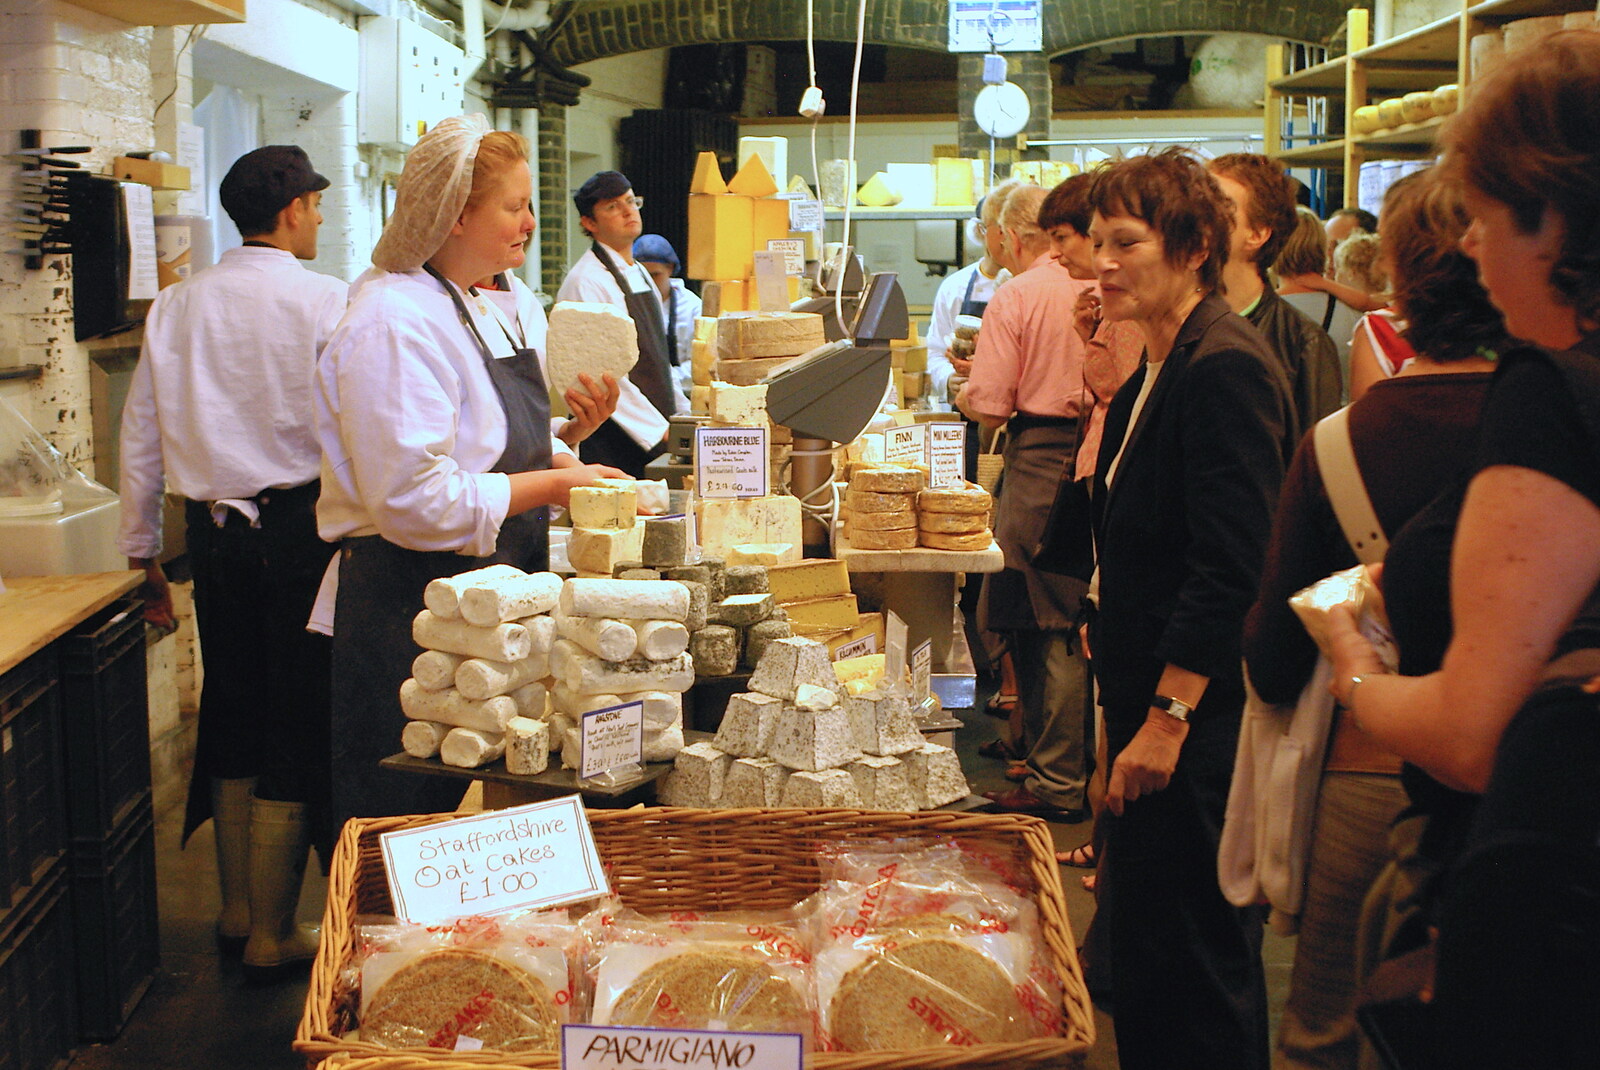 Neals Yard Dairy, a great but heaving cheese shop from Borough Market and North Clapham Tapas, London - 23rd July 2005